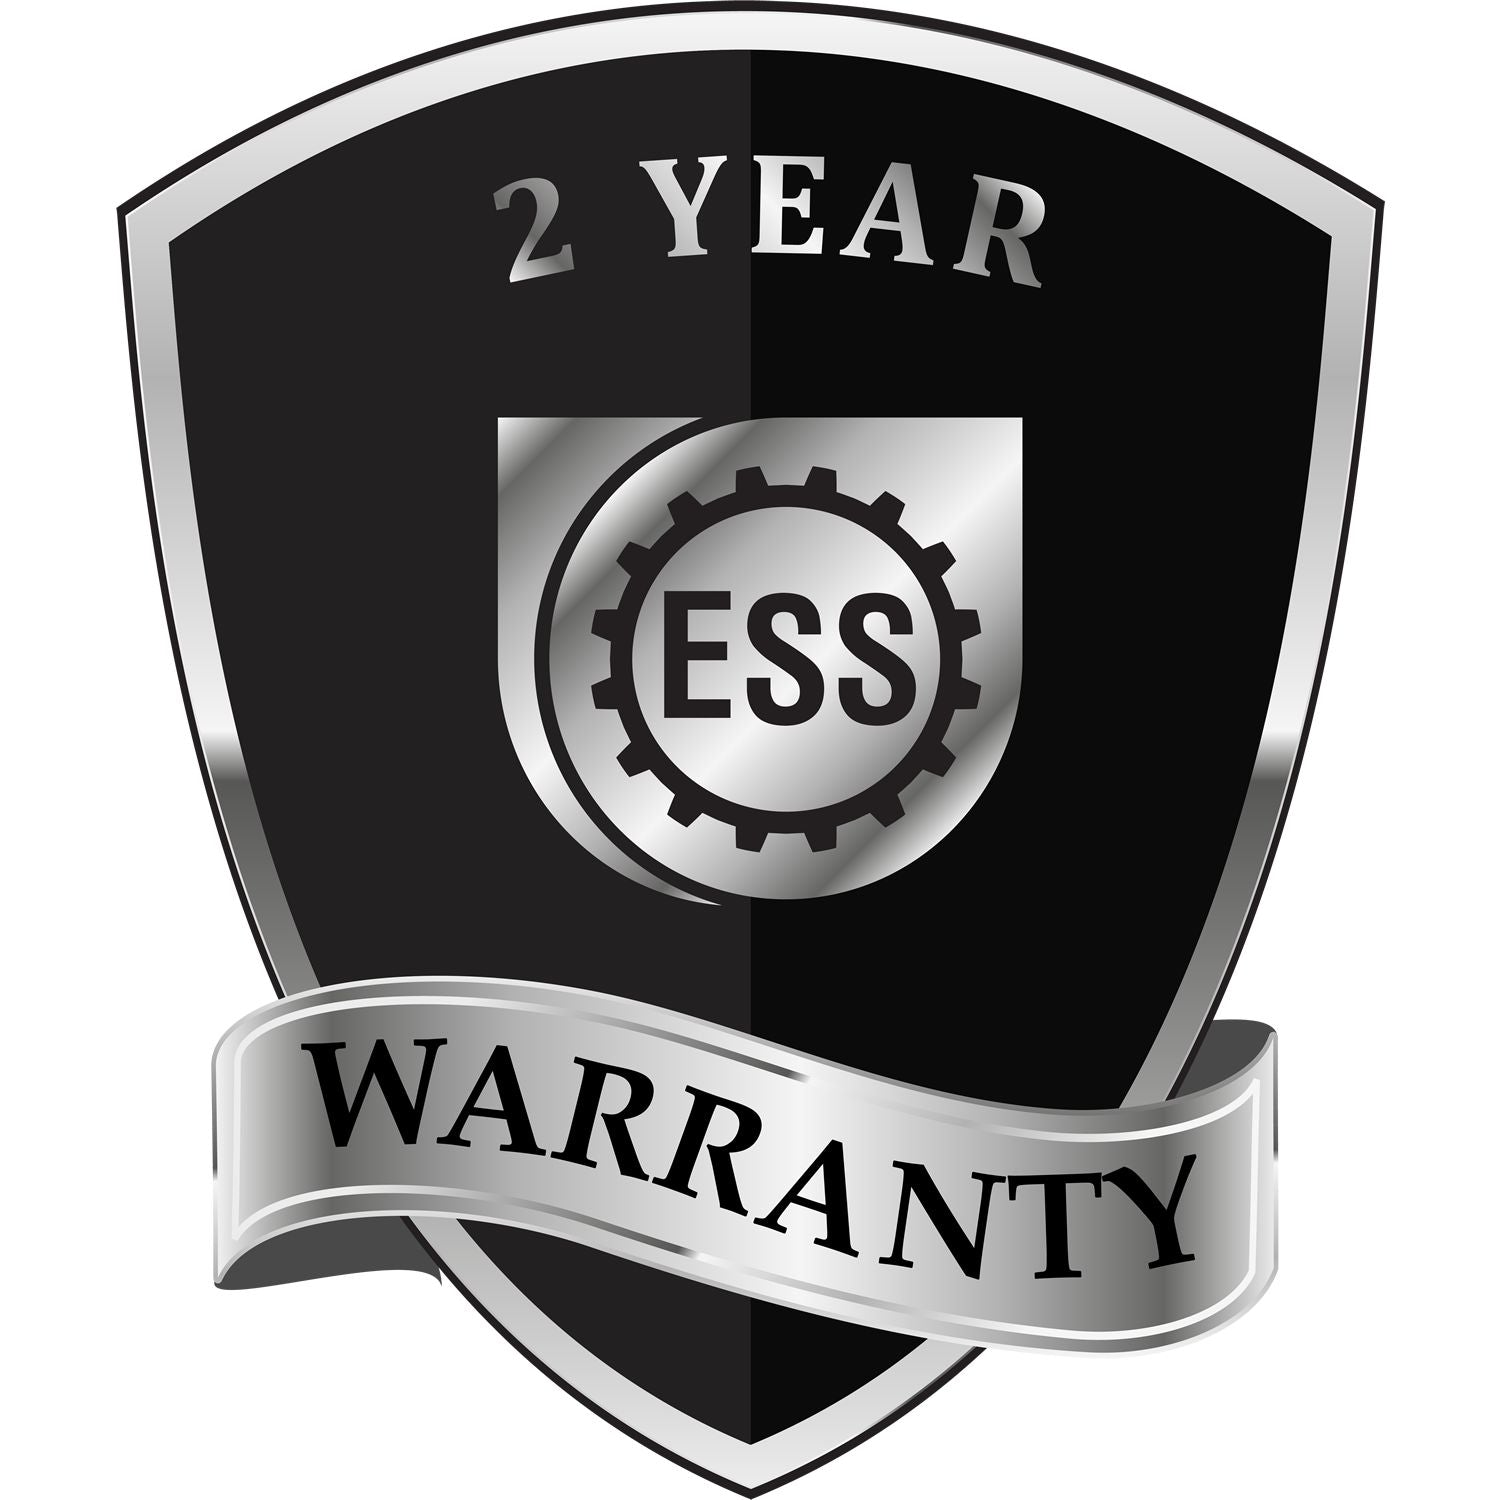 A badge or emblem showing a warranty icon for the Heavy Duty Tennessee Landscape Architect Cast Iron Embosser